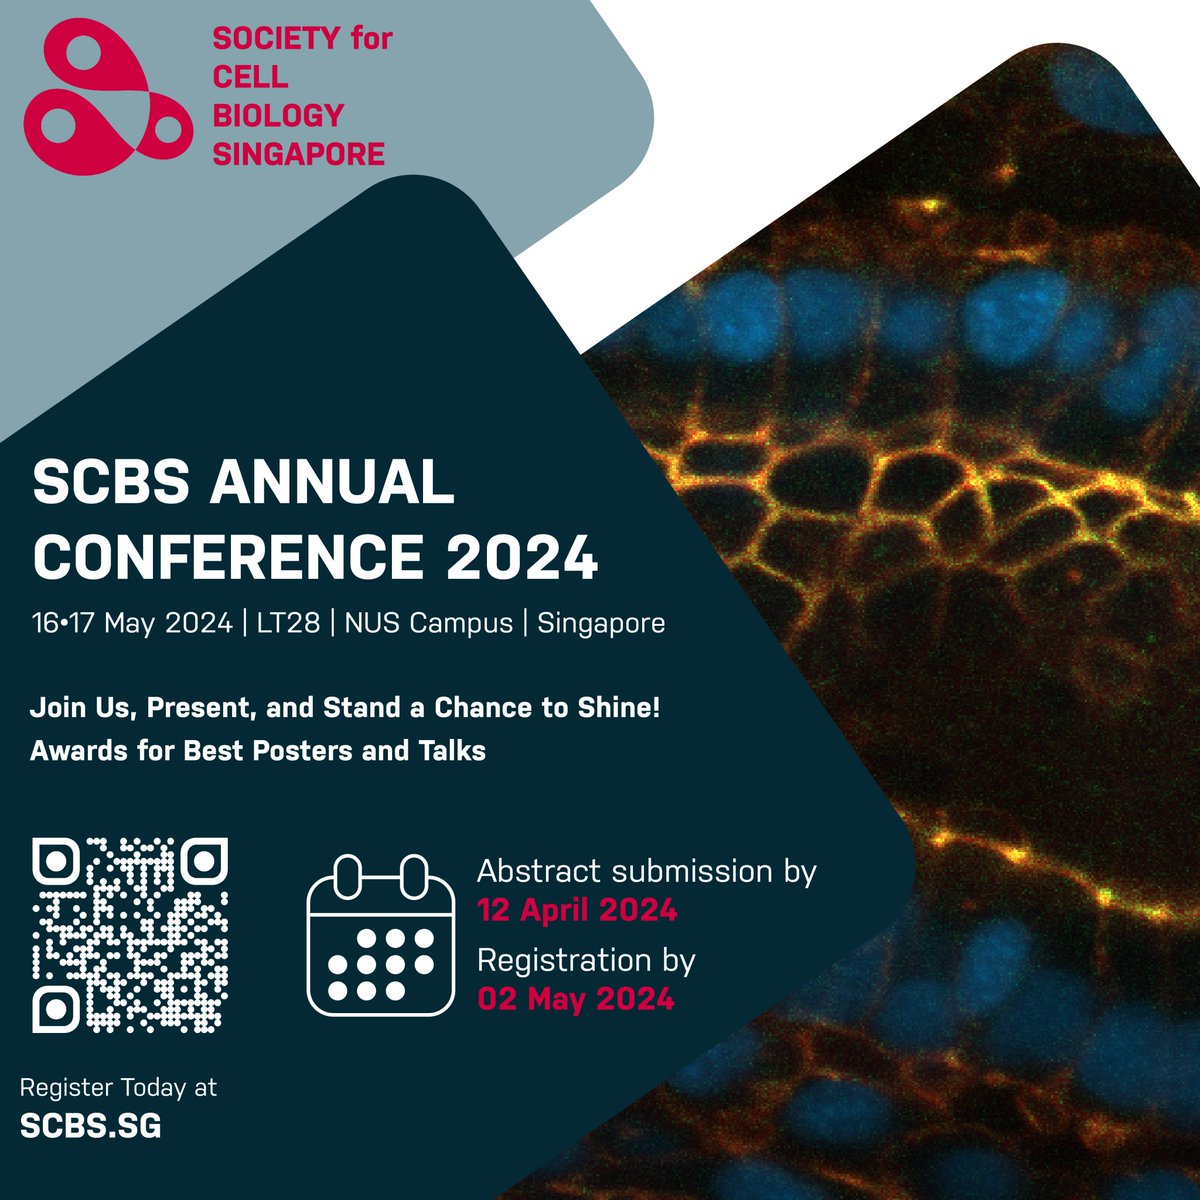 📢 The @SCBSsg Annual Conference 2024 is set for 16-17 May at LT28, NUS Campus, Singapore. Join us to explore the latest in #CellBiology, present your research, and compete for awards! 🌟 🔬 Register now: scbs.sg/scbs24 📅 Abstracts due: 12 April #SCBS24